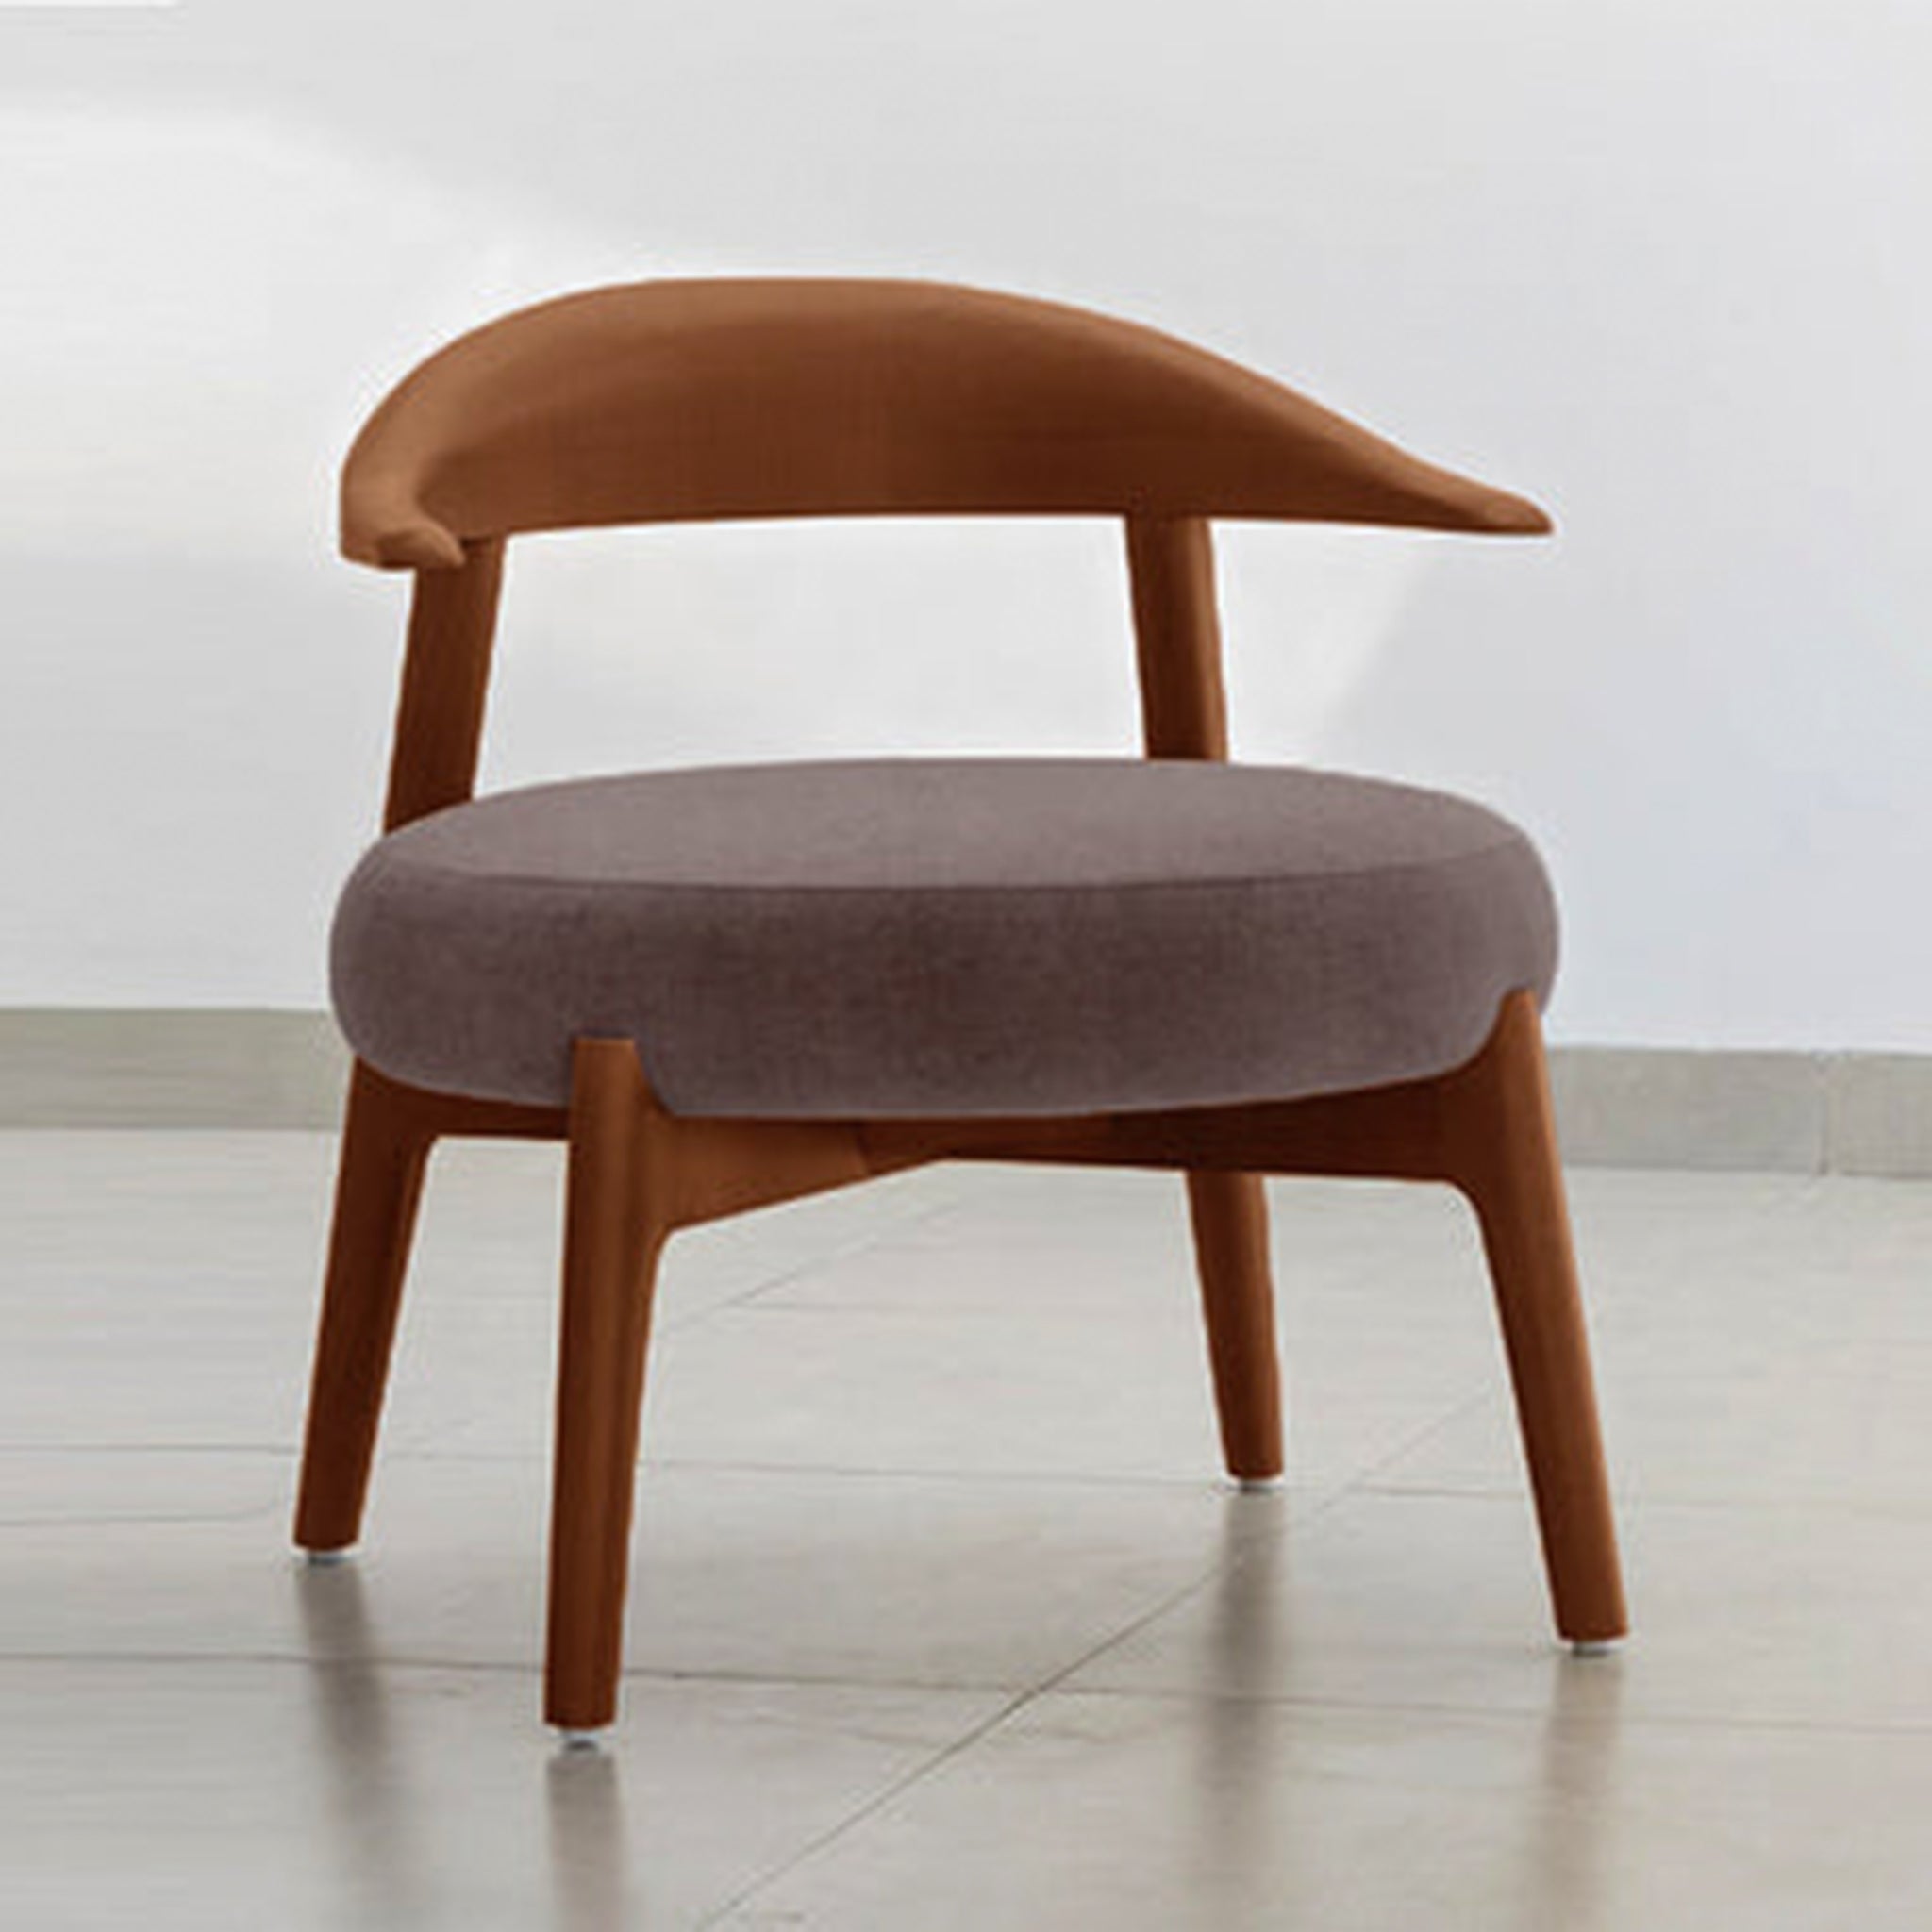 "The Hyde Accent Chair with unique wooden curves and comfortable fabric"